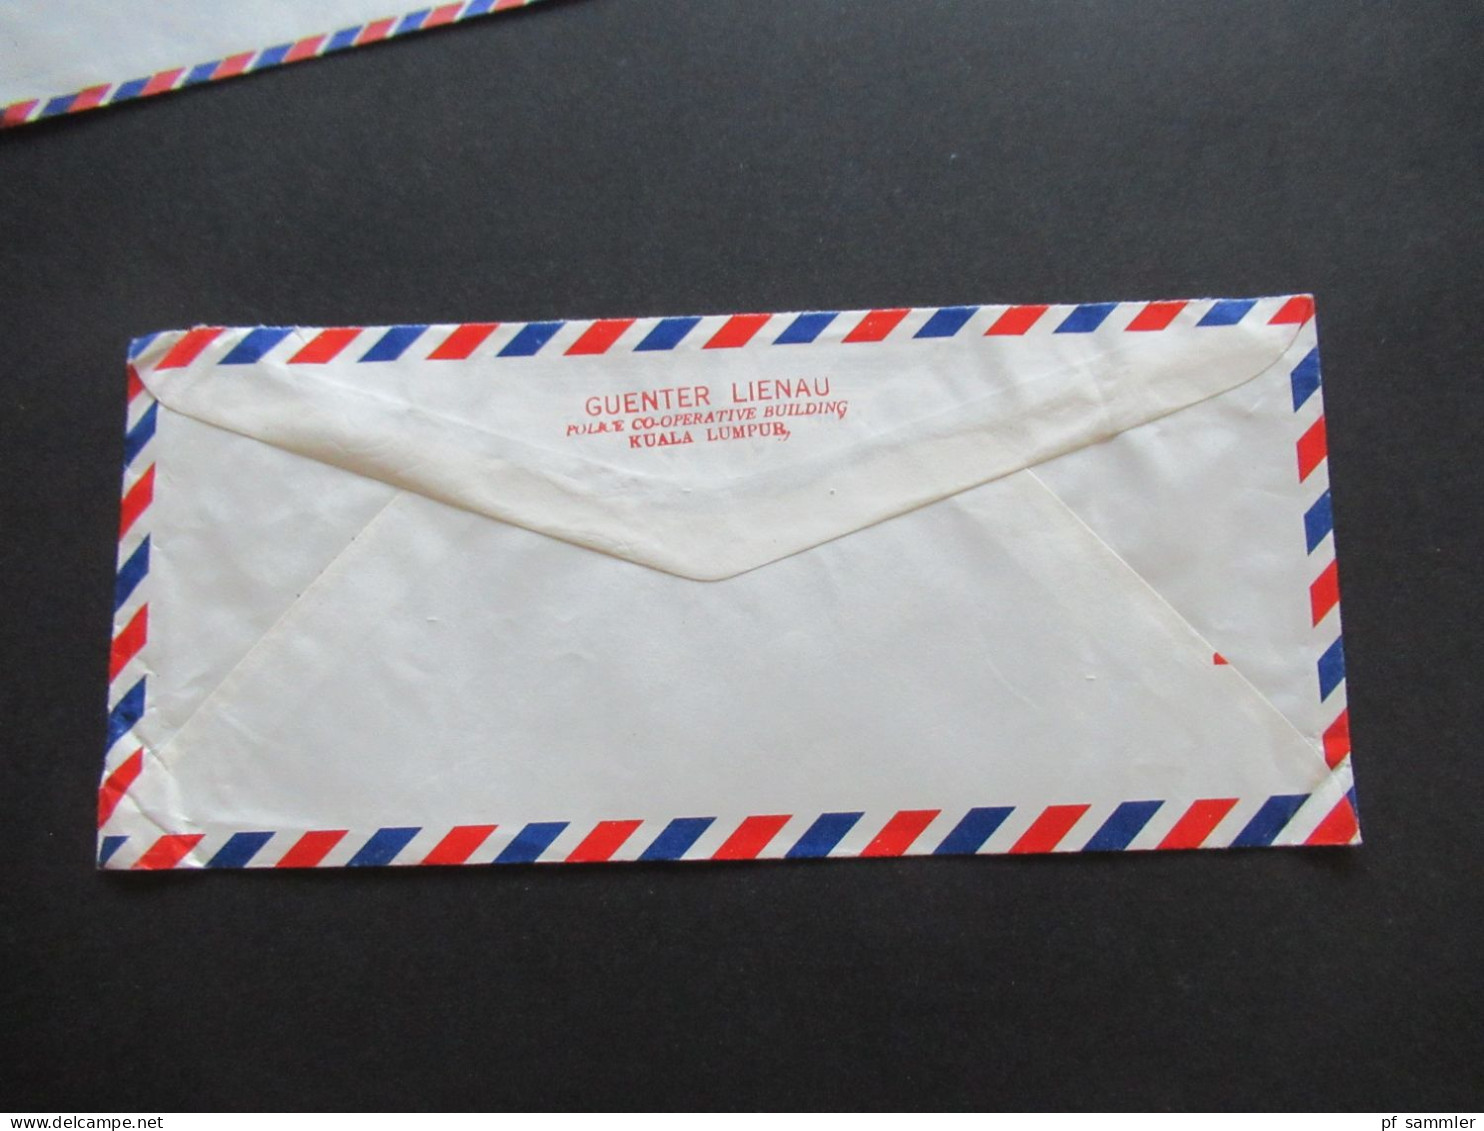 Asien Malaysia 1963 / 1964 Air Mail Luftpost 6 Belege 1x Registered Kuala Lumpur A Abs. Guenter Linau Police Co-operativ